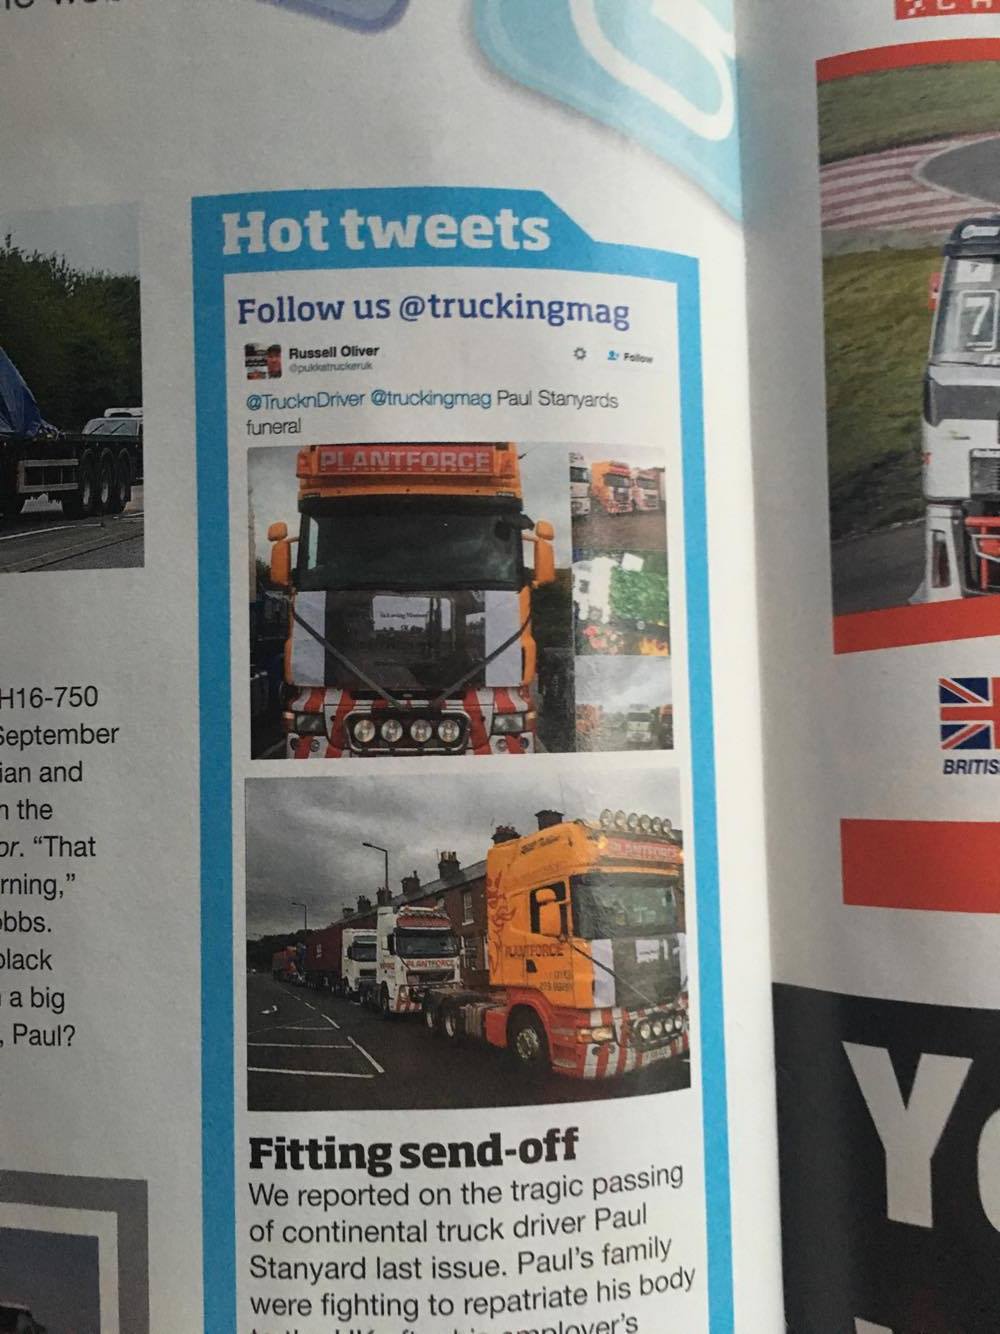 Russell's truck in a magazine